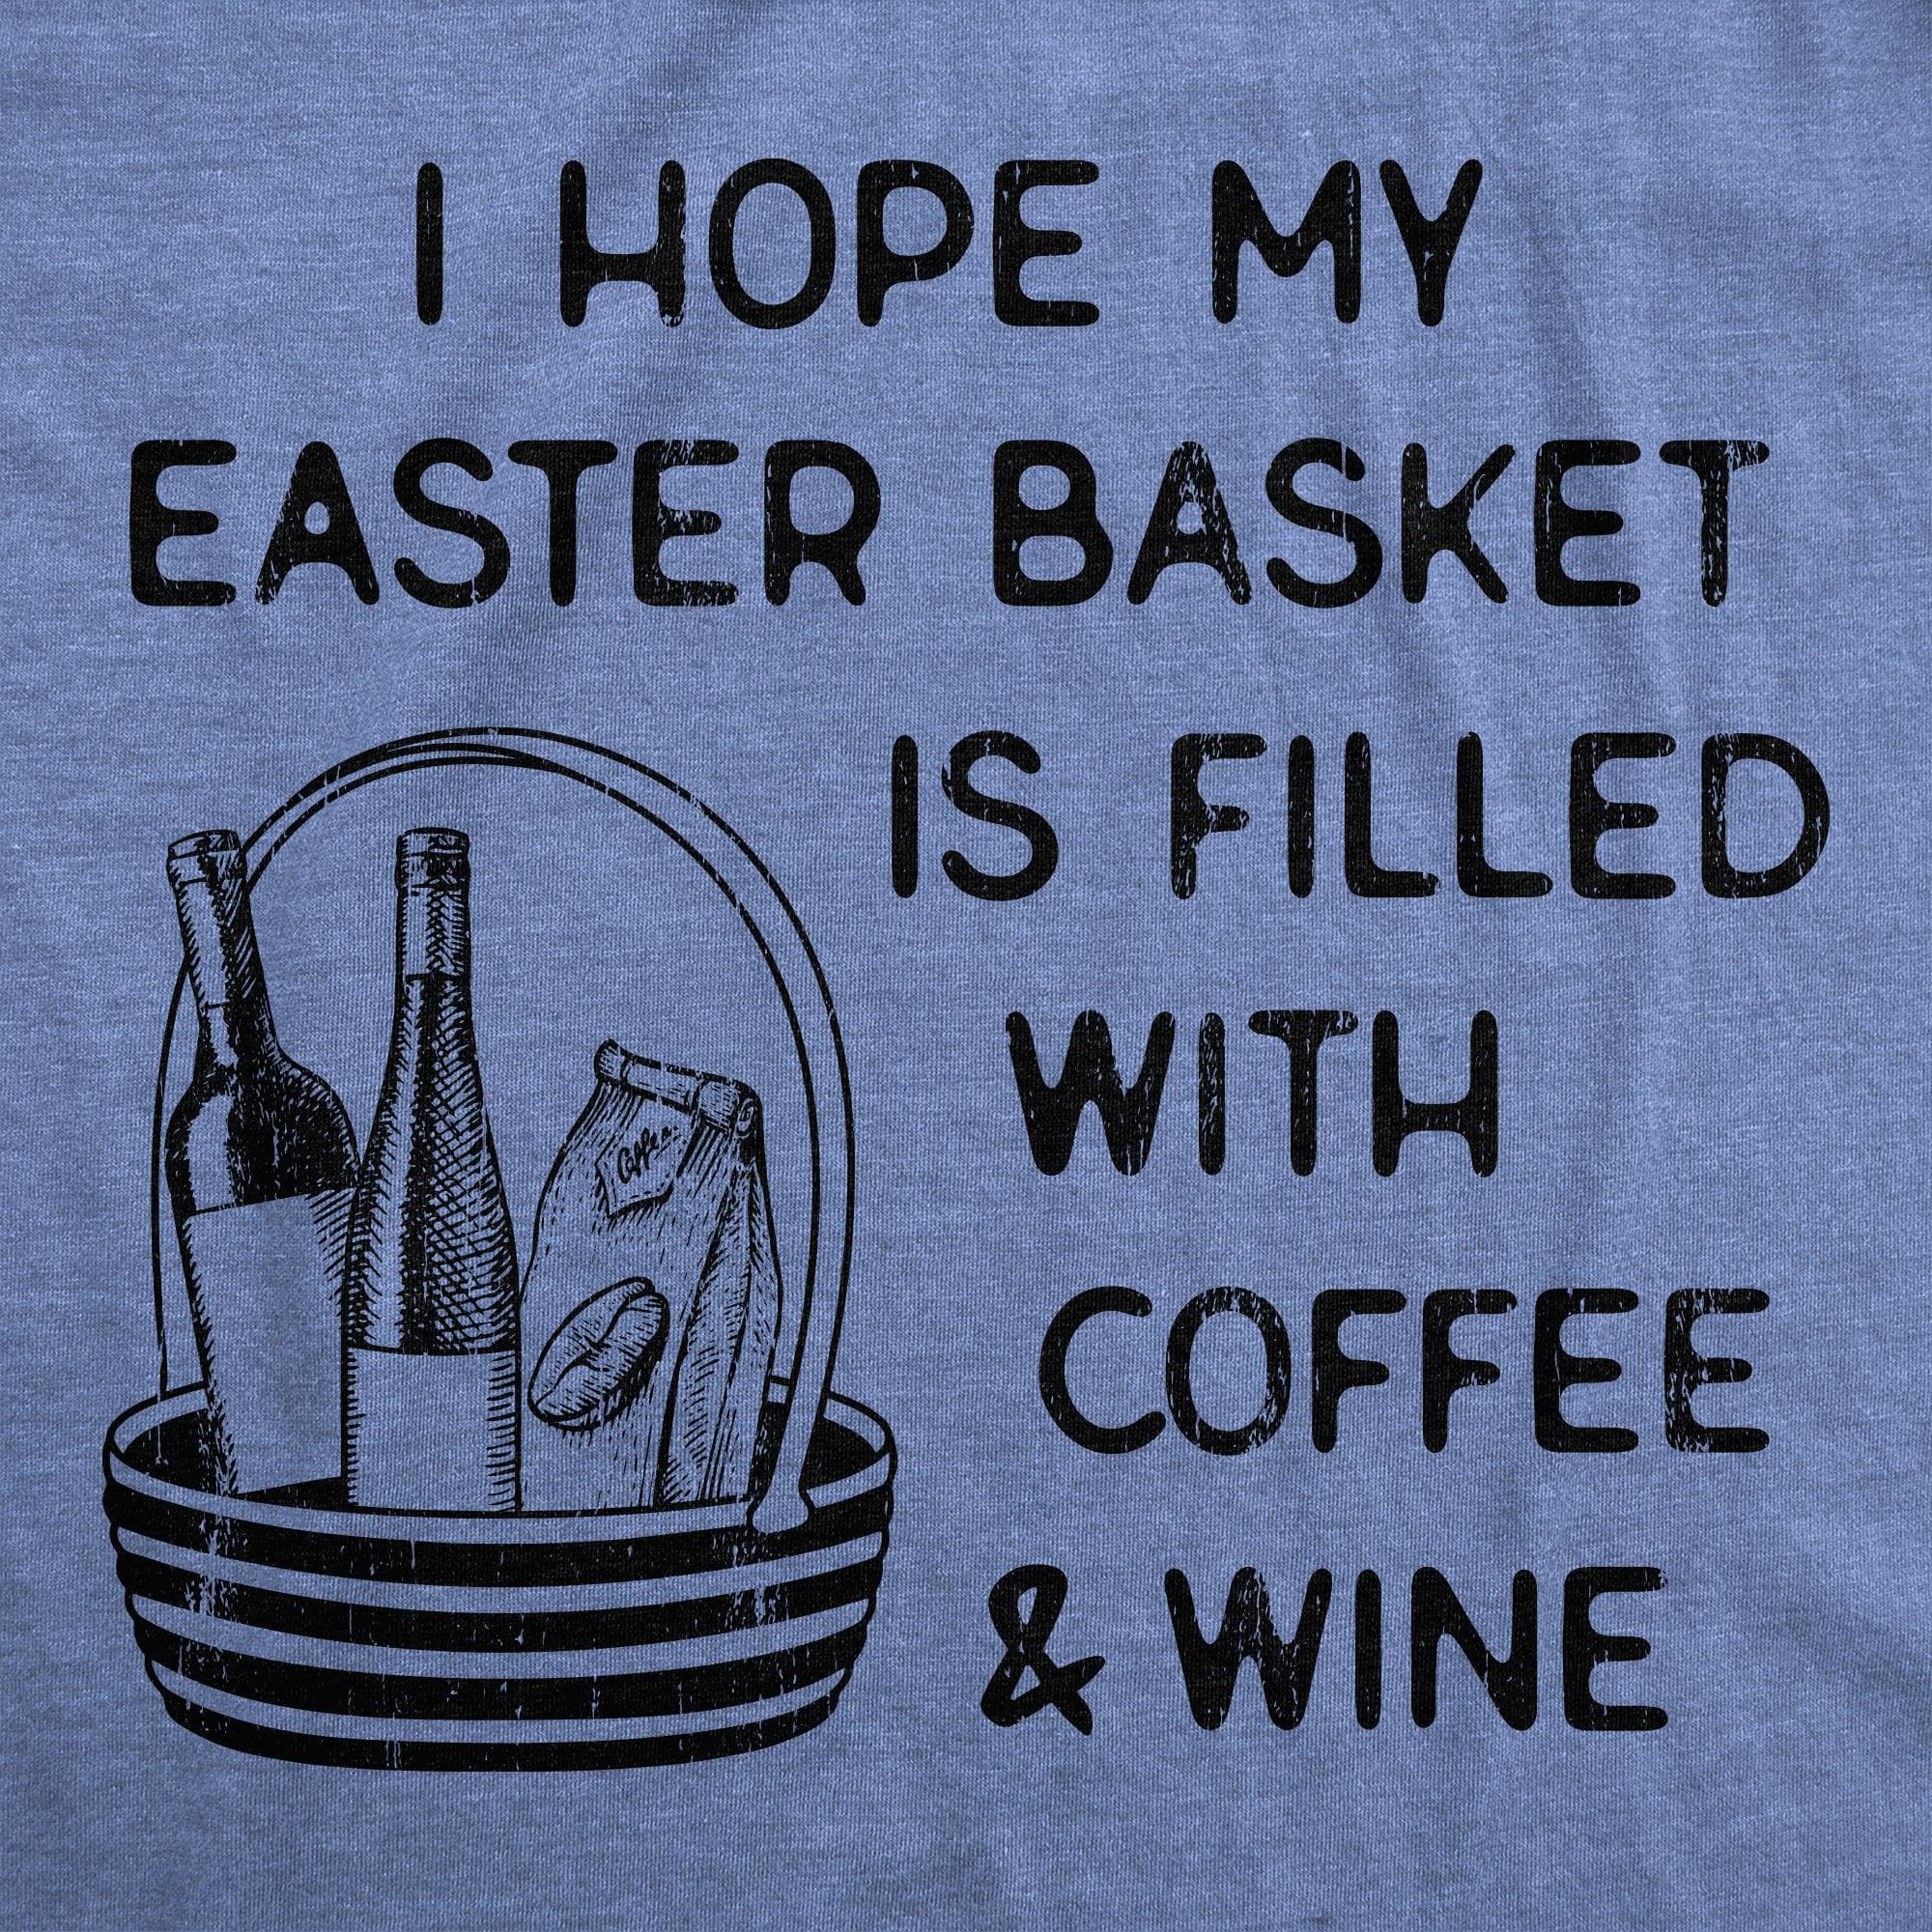 I Hope My Easter Basket Is Filled With Coffee And Wine Women's Tshirt  -  Crazy Dog T-Shirts